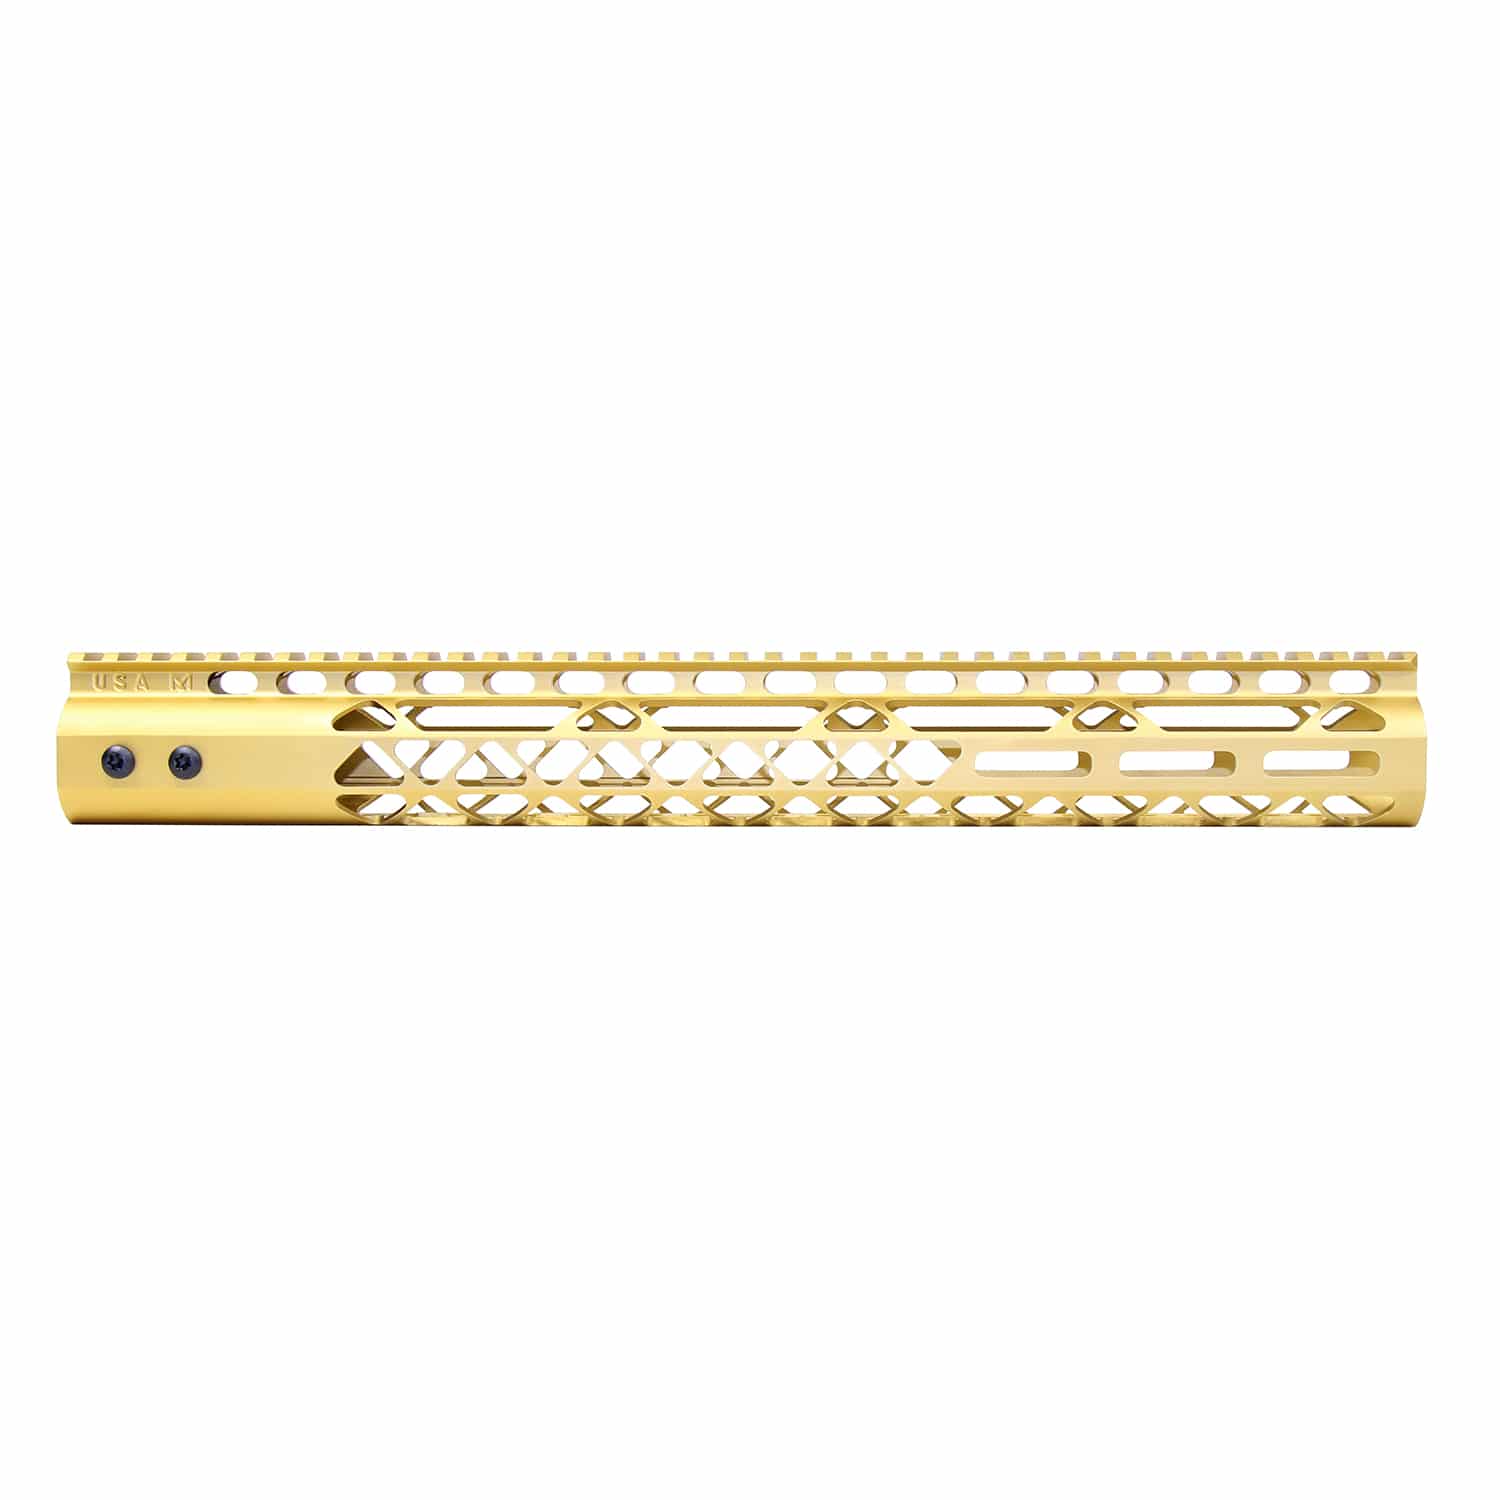 15" Air Lite Series M-LOK Free Floating Handguard With Monolithic Top Rail (Anodized Gold)